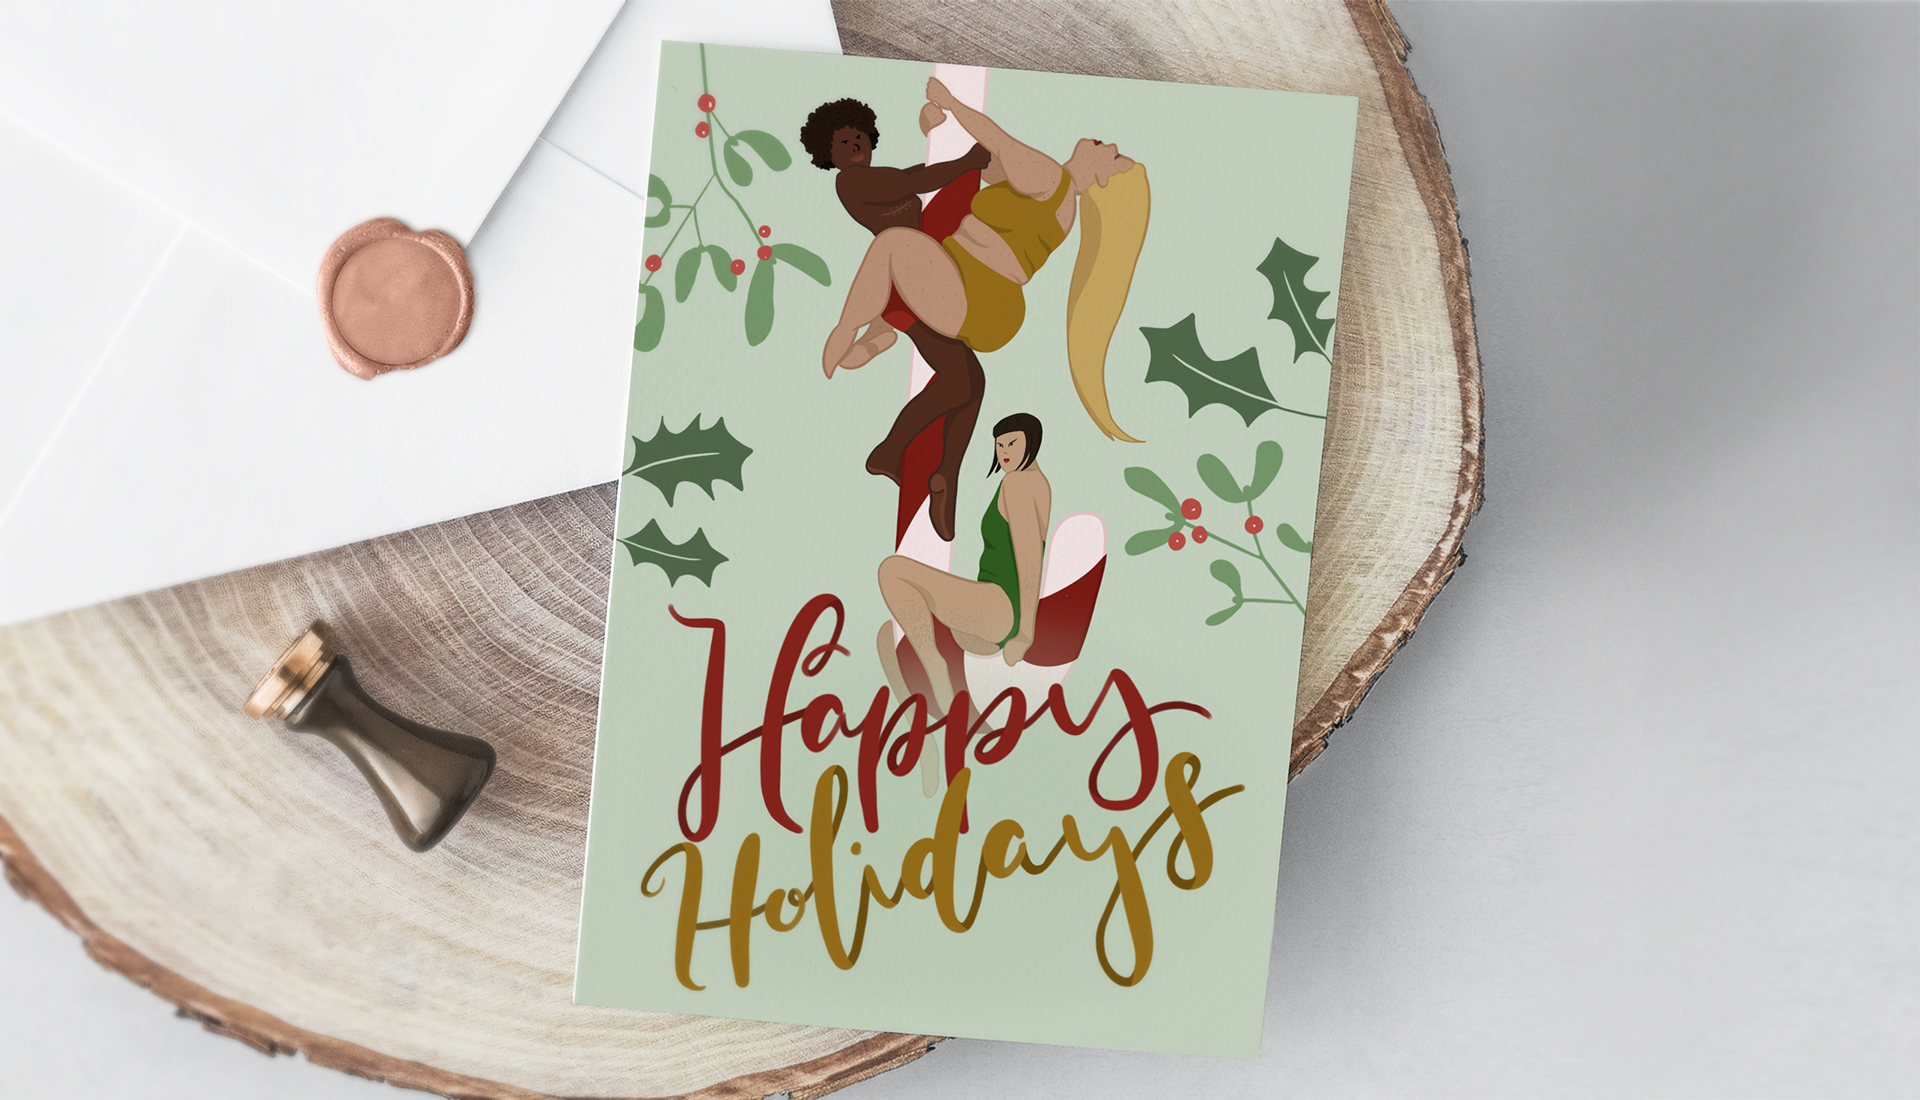 Christmas card with envelope laying on a wooden plate